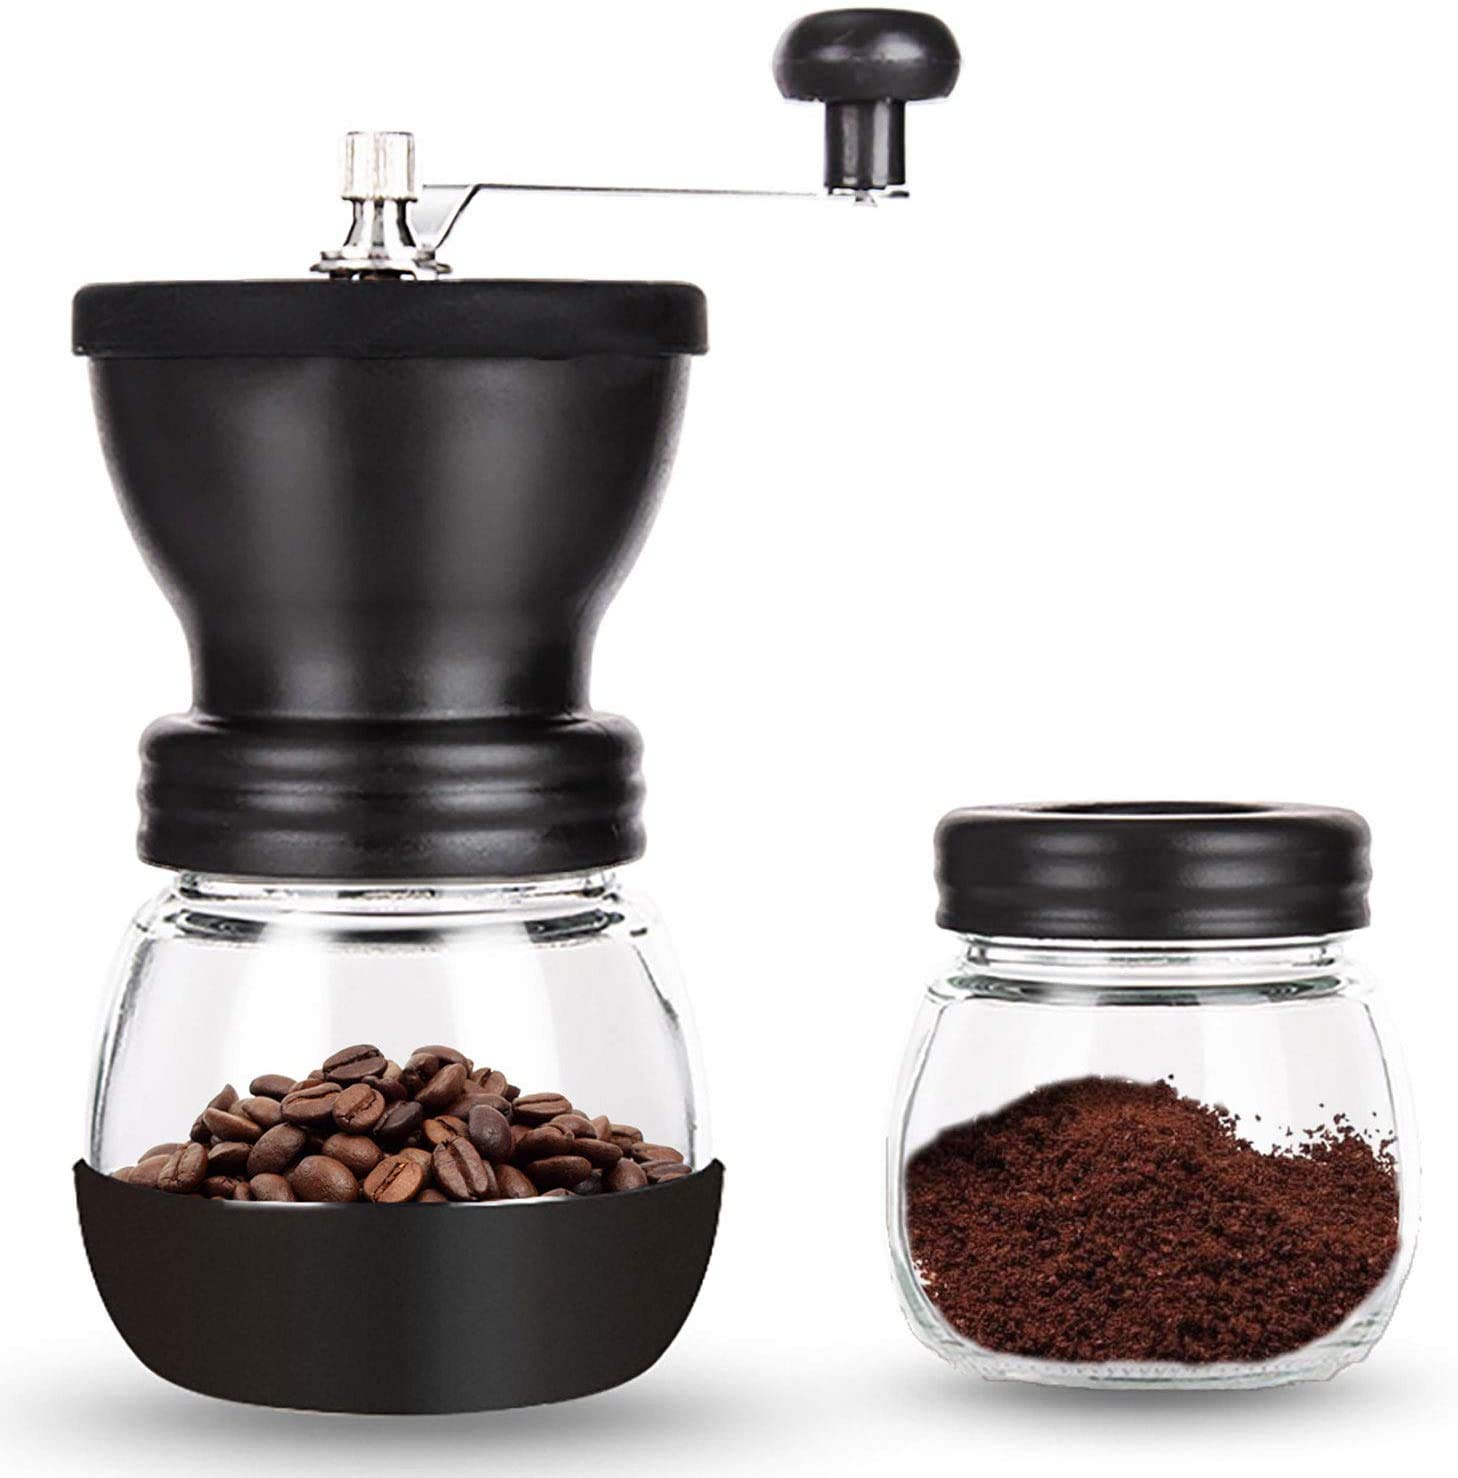 InstaCuppa Manual Coffee Bean Grinder with Extra Glass Jar, Conical Ceramic Burr Mill, Stainless Steel Handle for Aeropress, Pour Over Drip Coffee, Espresso